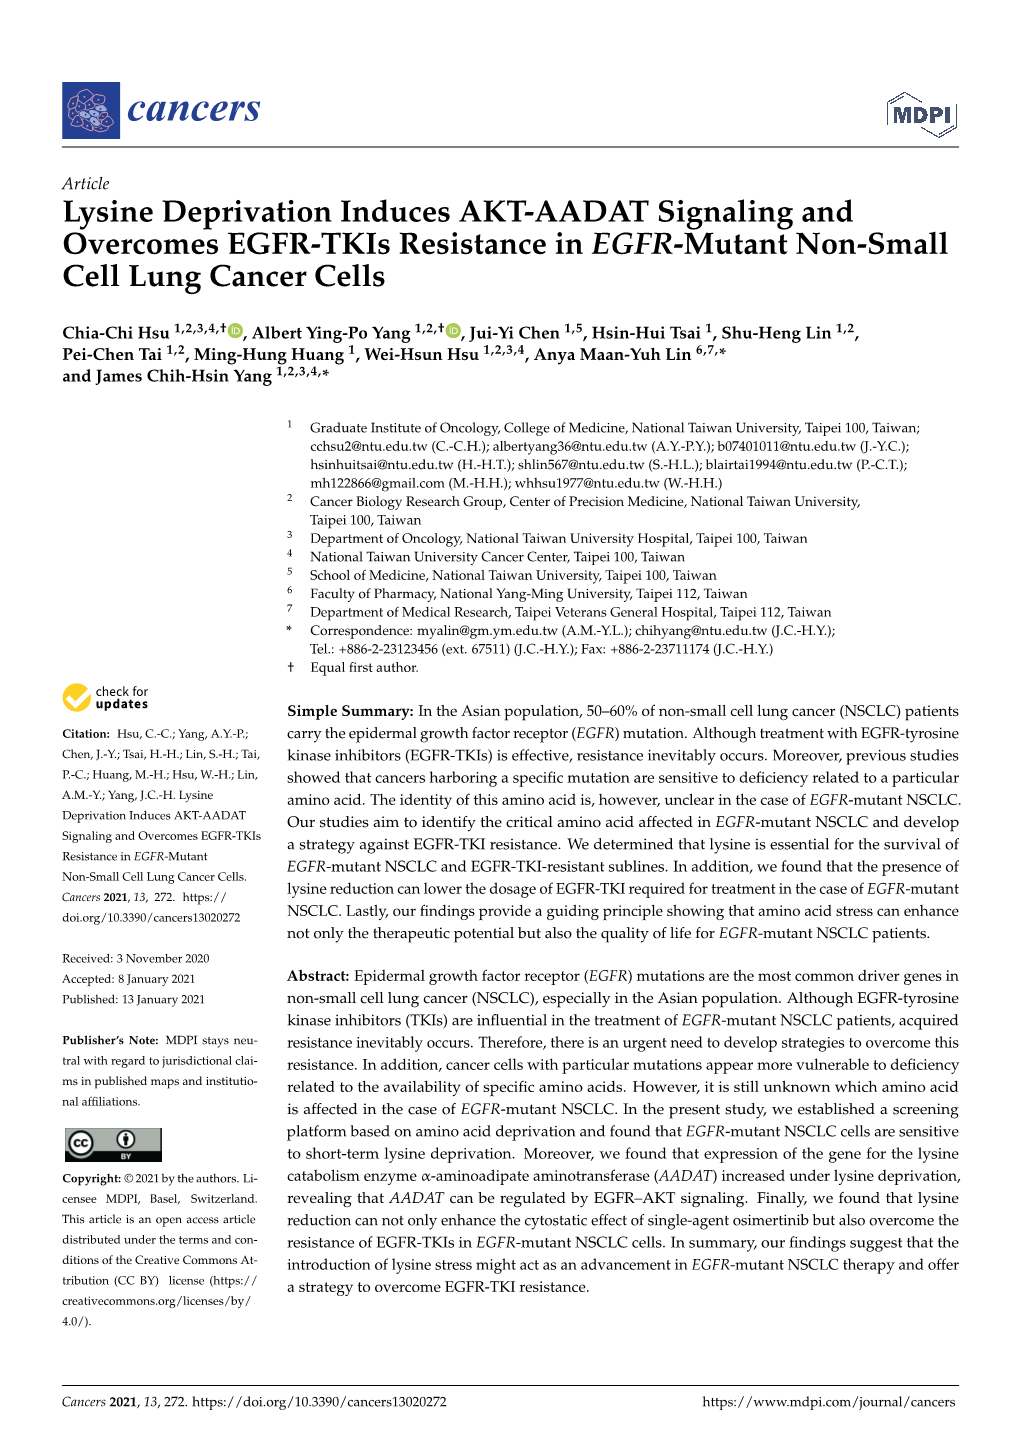 Lysine Deprivation Induces AKT-AADAT Signaling and Overcomes EGFR-Tkis Resistance in EGFR-Mutant Non-Small Cell Lung Cancer Cells